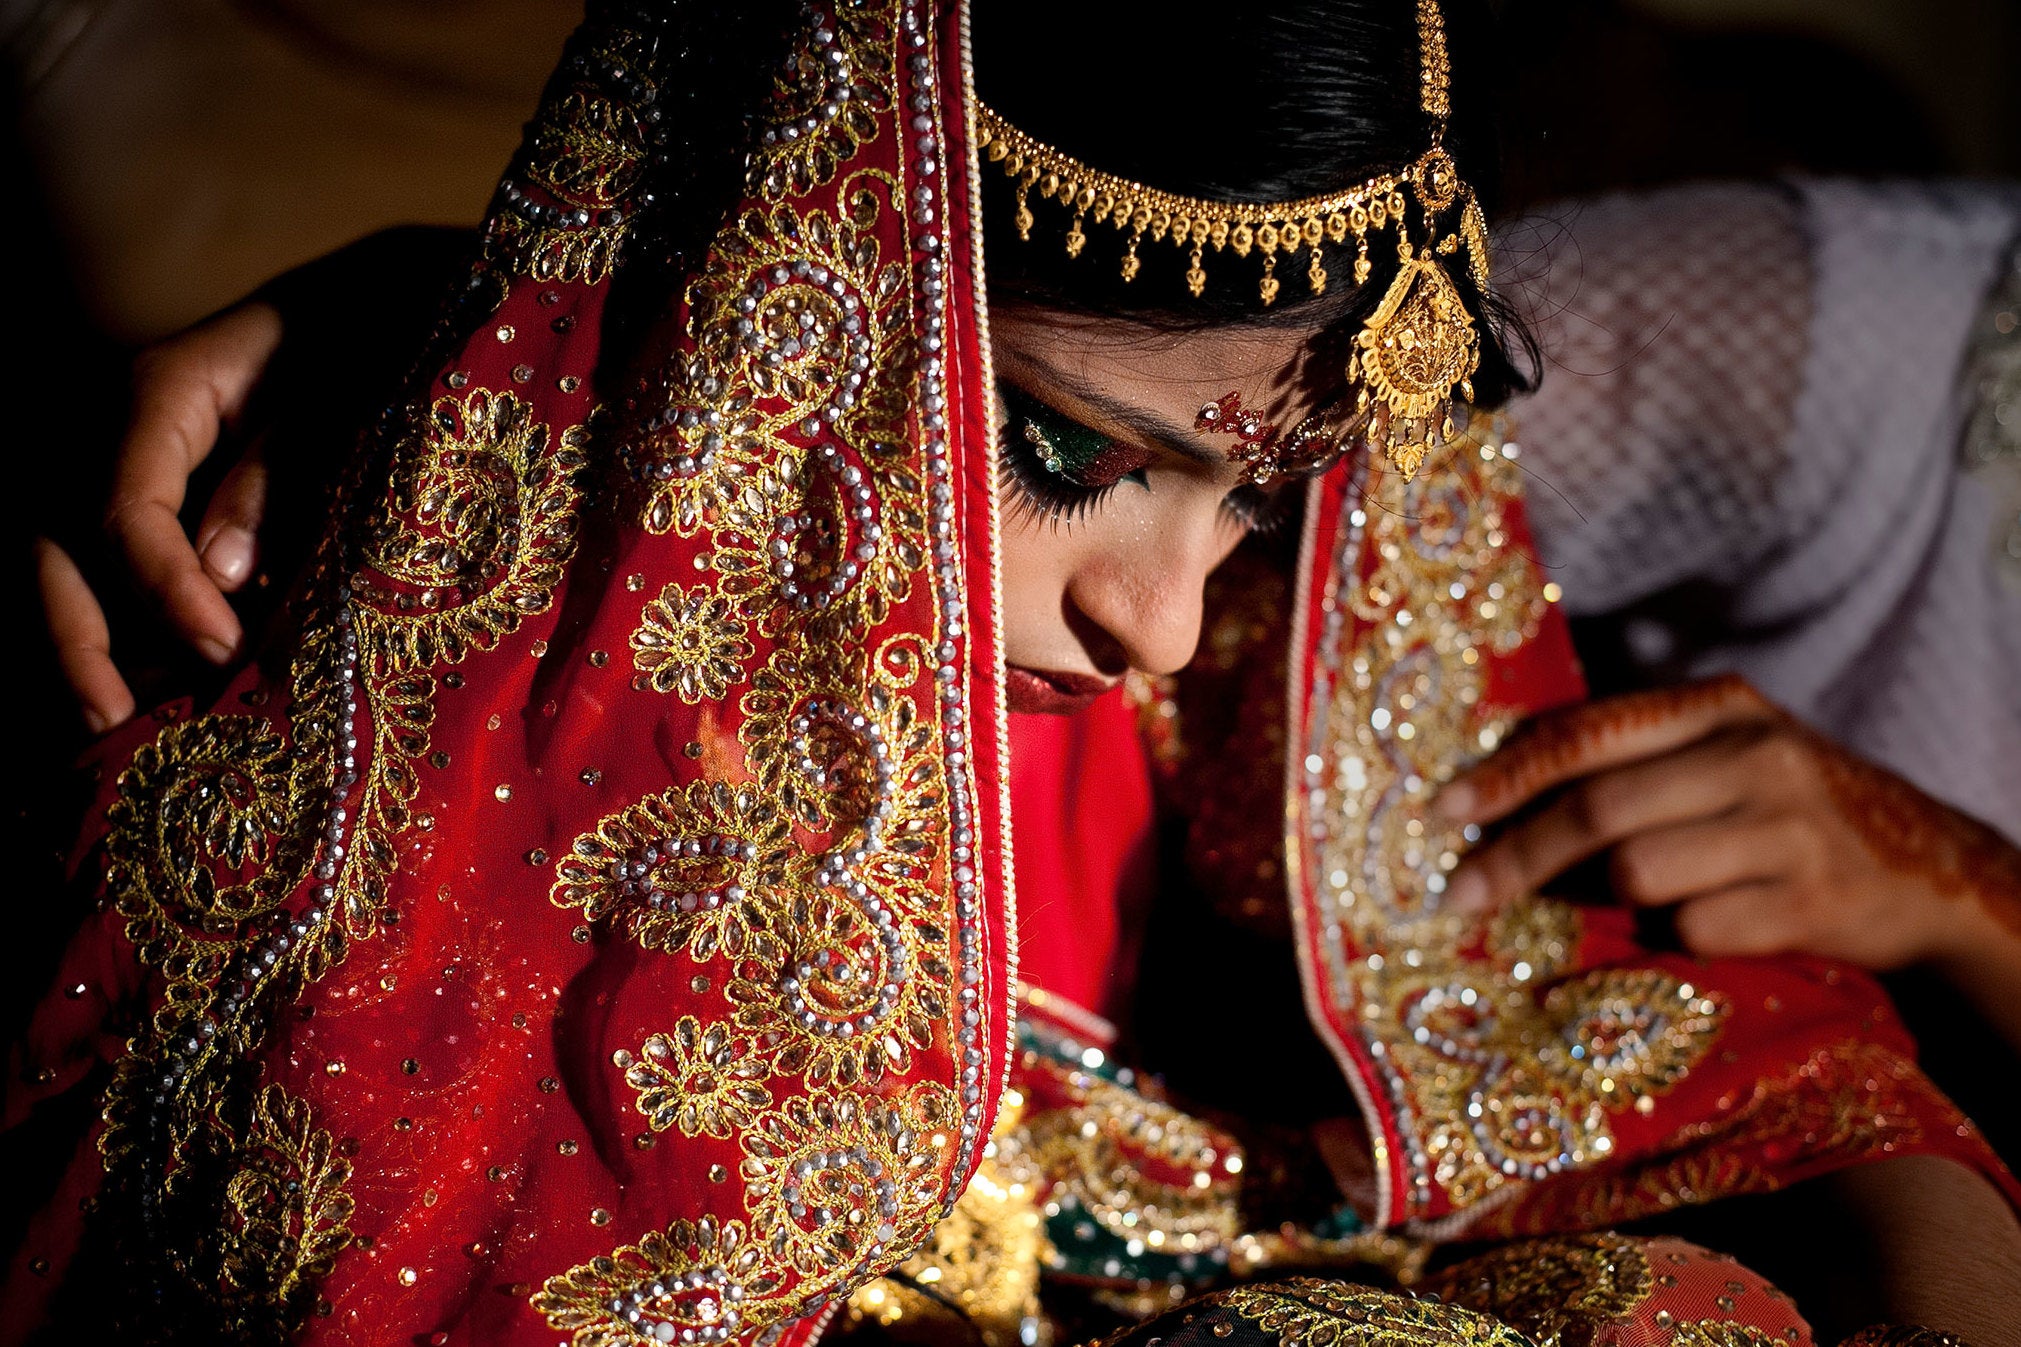 Bangladesh child marriage New law will reduce minimum marital age to zero The Independent The Independent picture